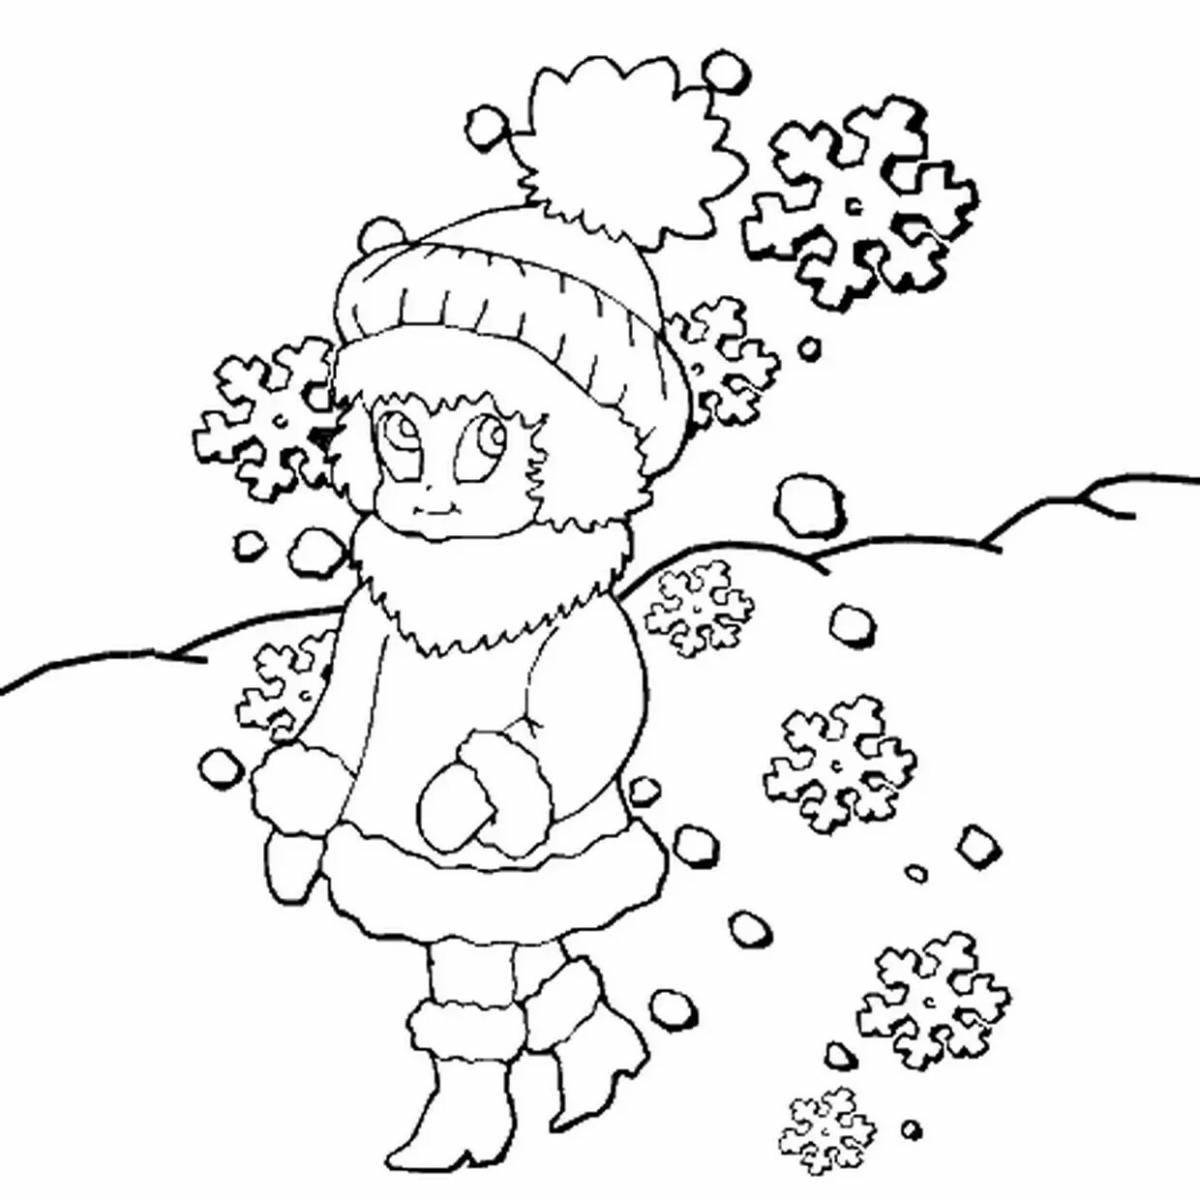 Live snow coloring for kids